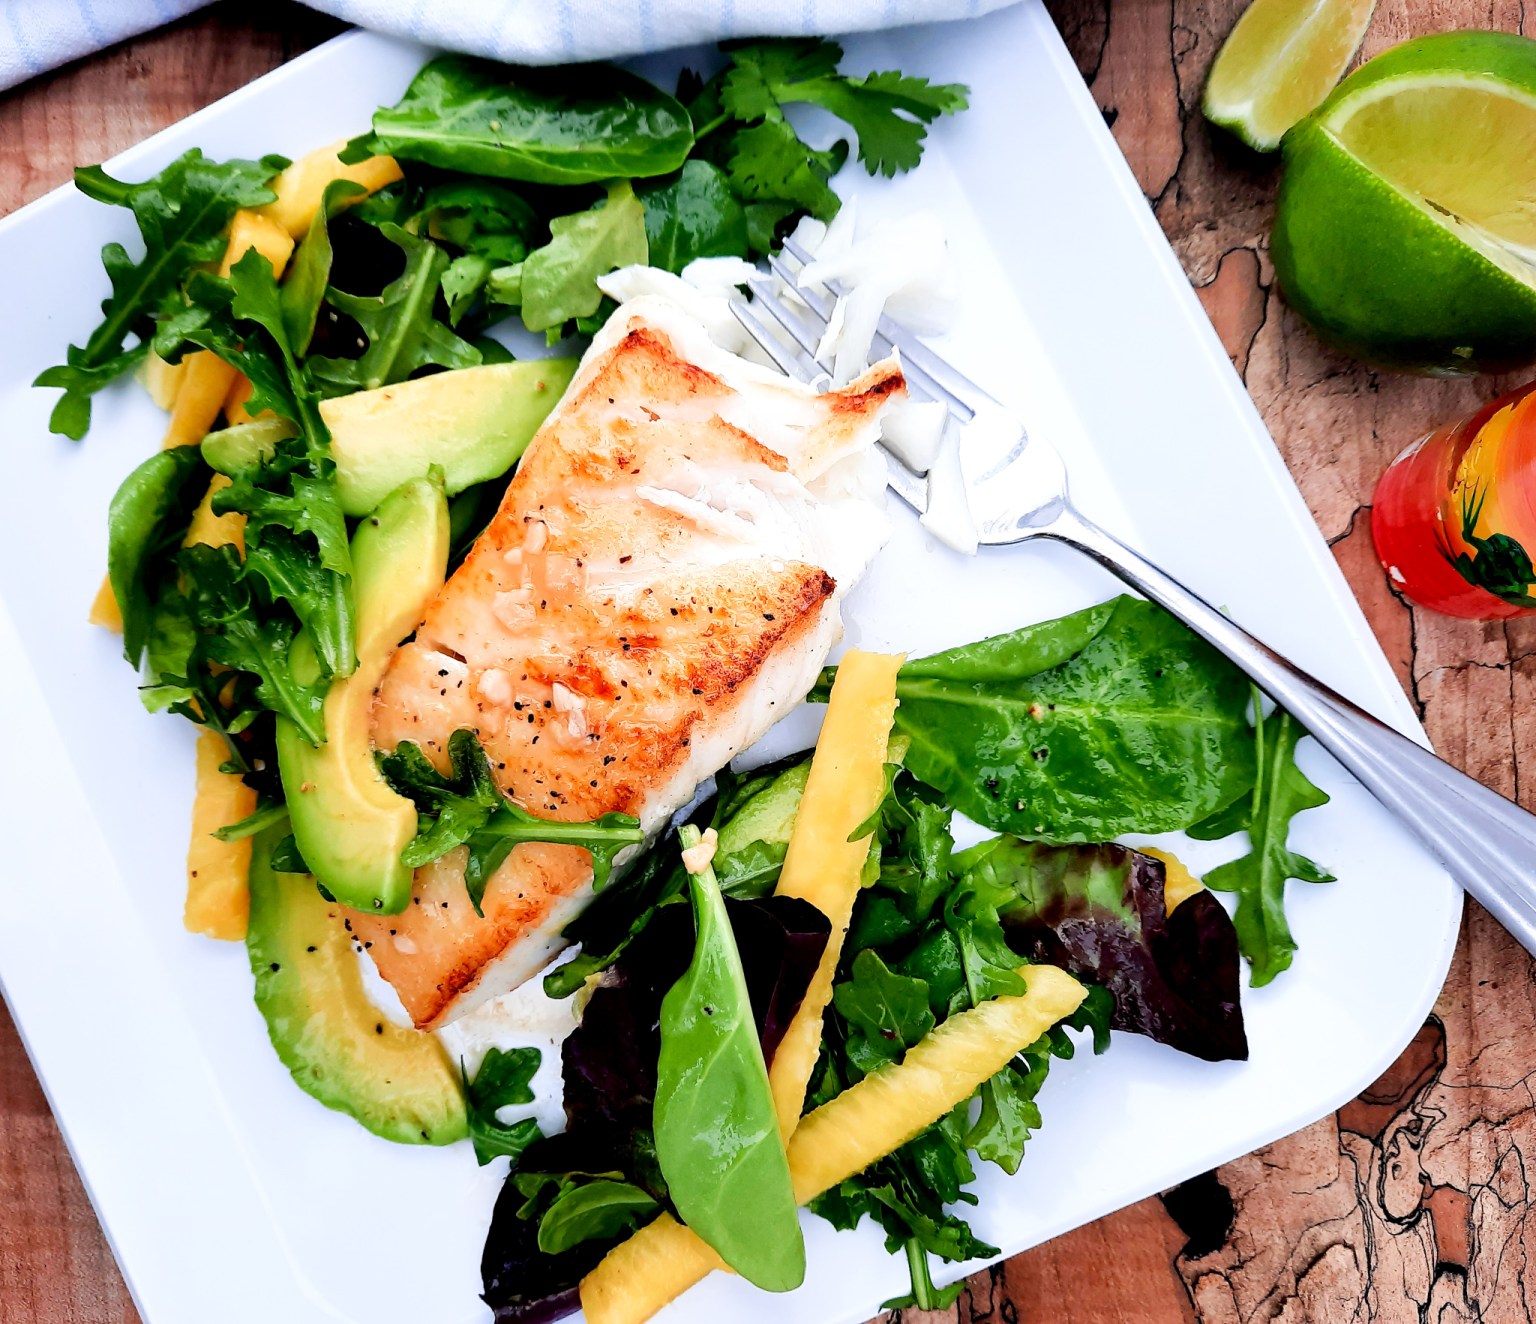 Light and refreshing Avocado Pineapple Salad with Halibut takes Summer into full swing and simplifies your weeknight dinner.